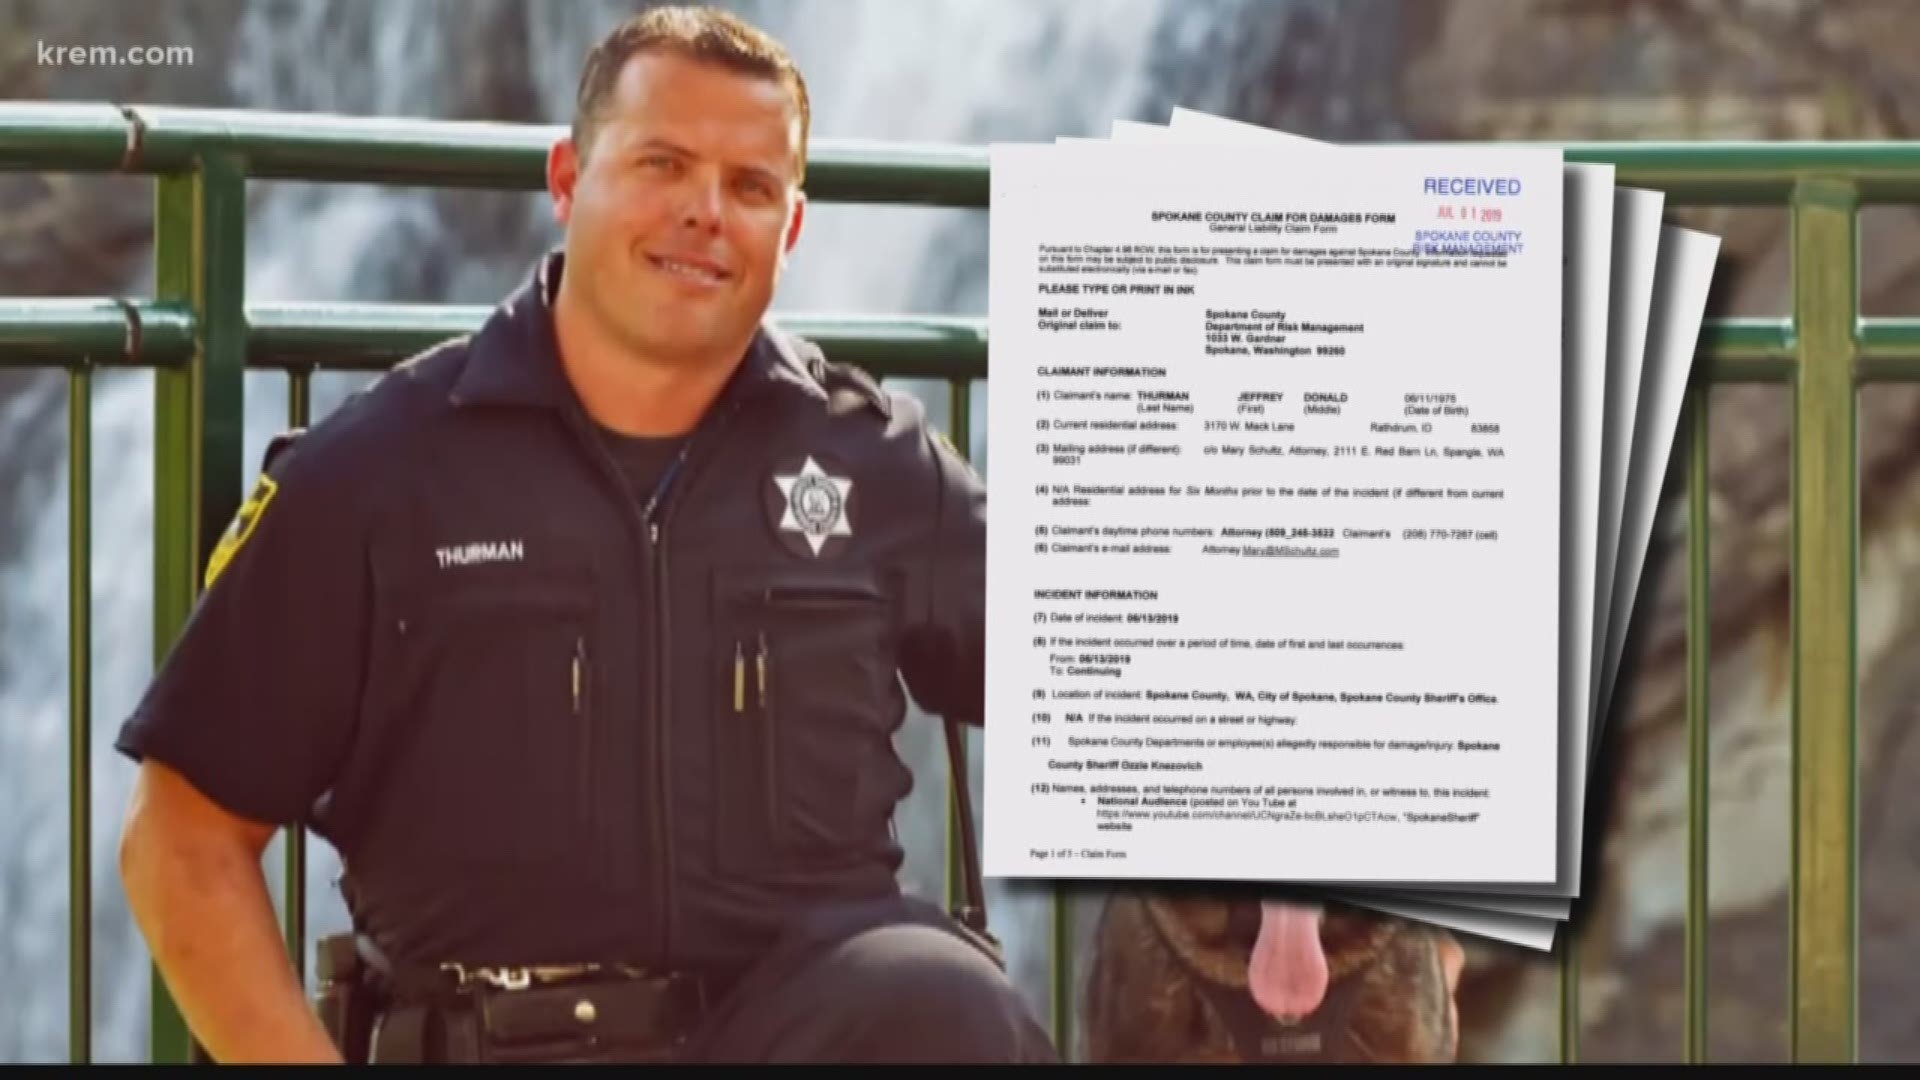 Sgt. Jeff Thurman, the former handler of K-9 Laslo, was fired after he allegedly spoke to a colleague about killing minorities. Now, he has filed a tort claim seeking nearly $12.5 million in damages from Spokane County.